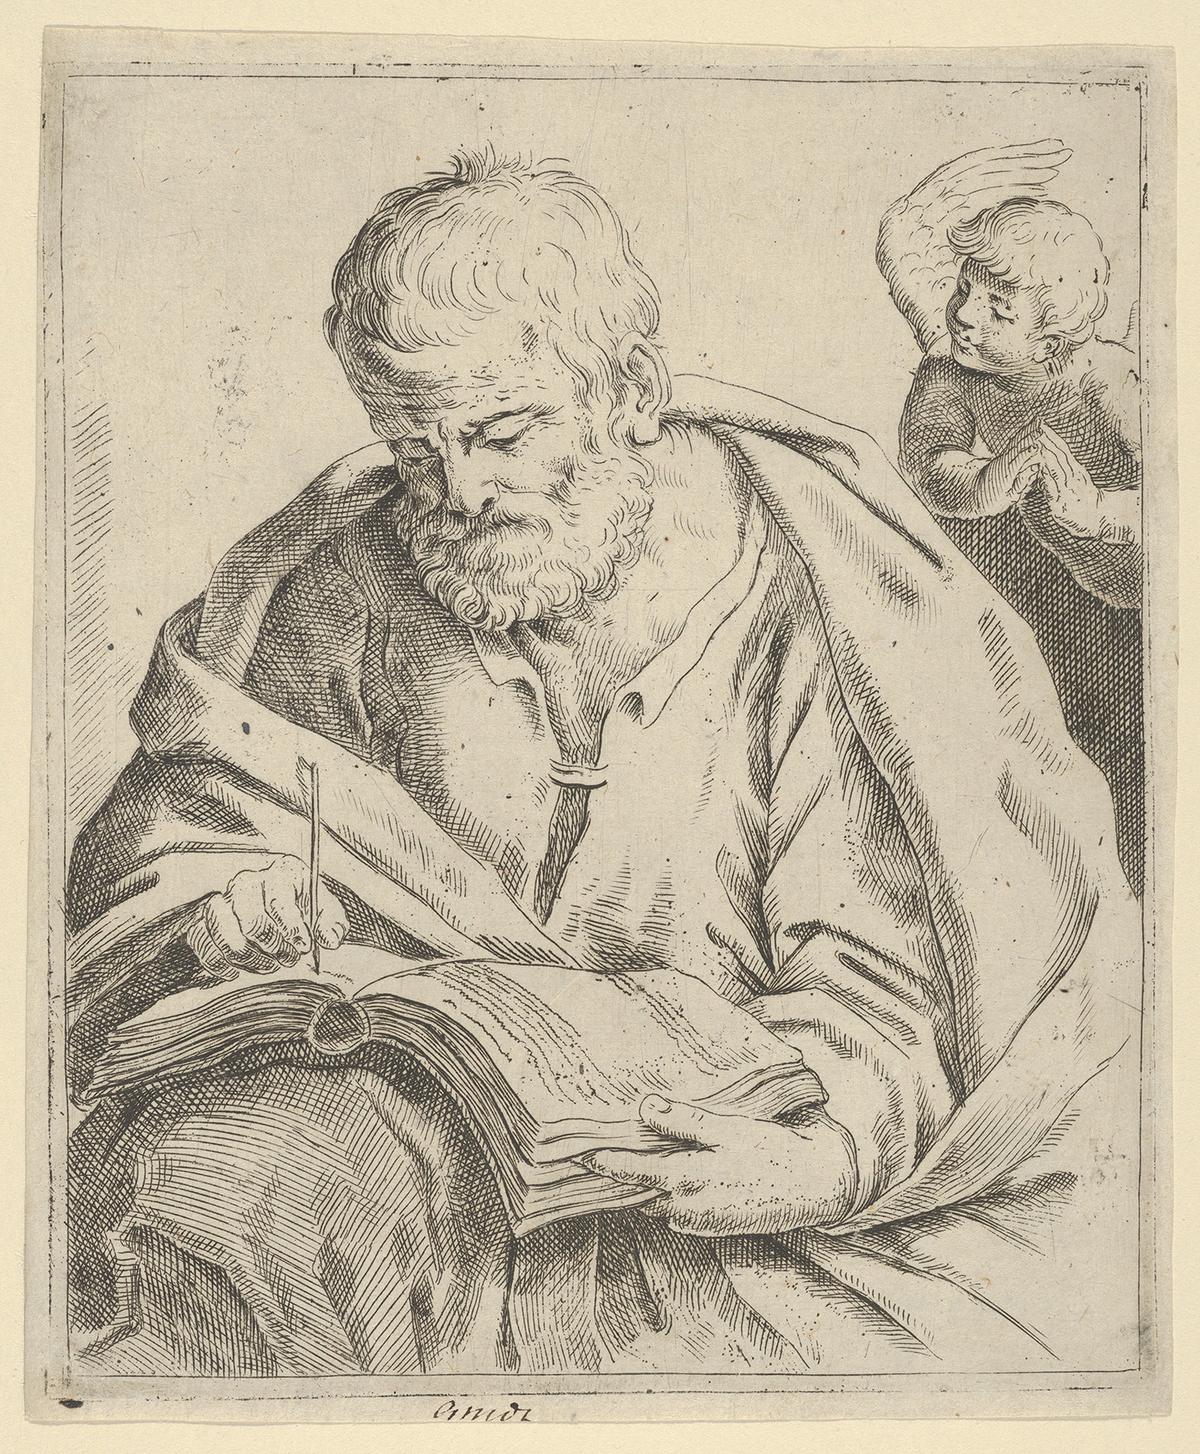 An engraving of a man writing in a book with an angel looking over his shoulder, 17h century, by an artist after Guido Reni. The Metropolitan Museum of Art, New York City. (Public Domain)